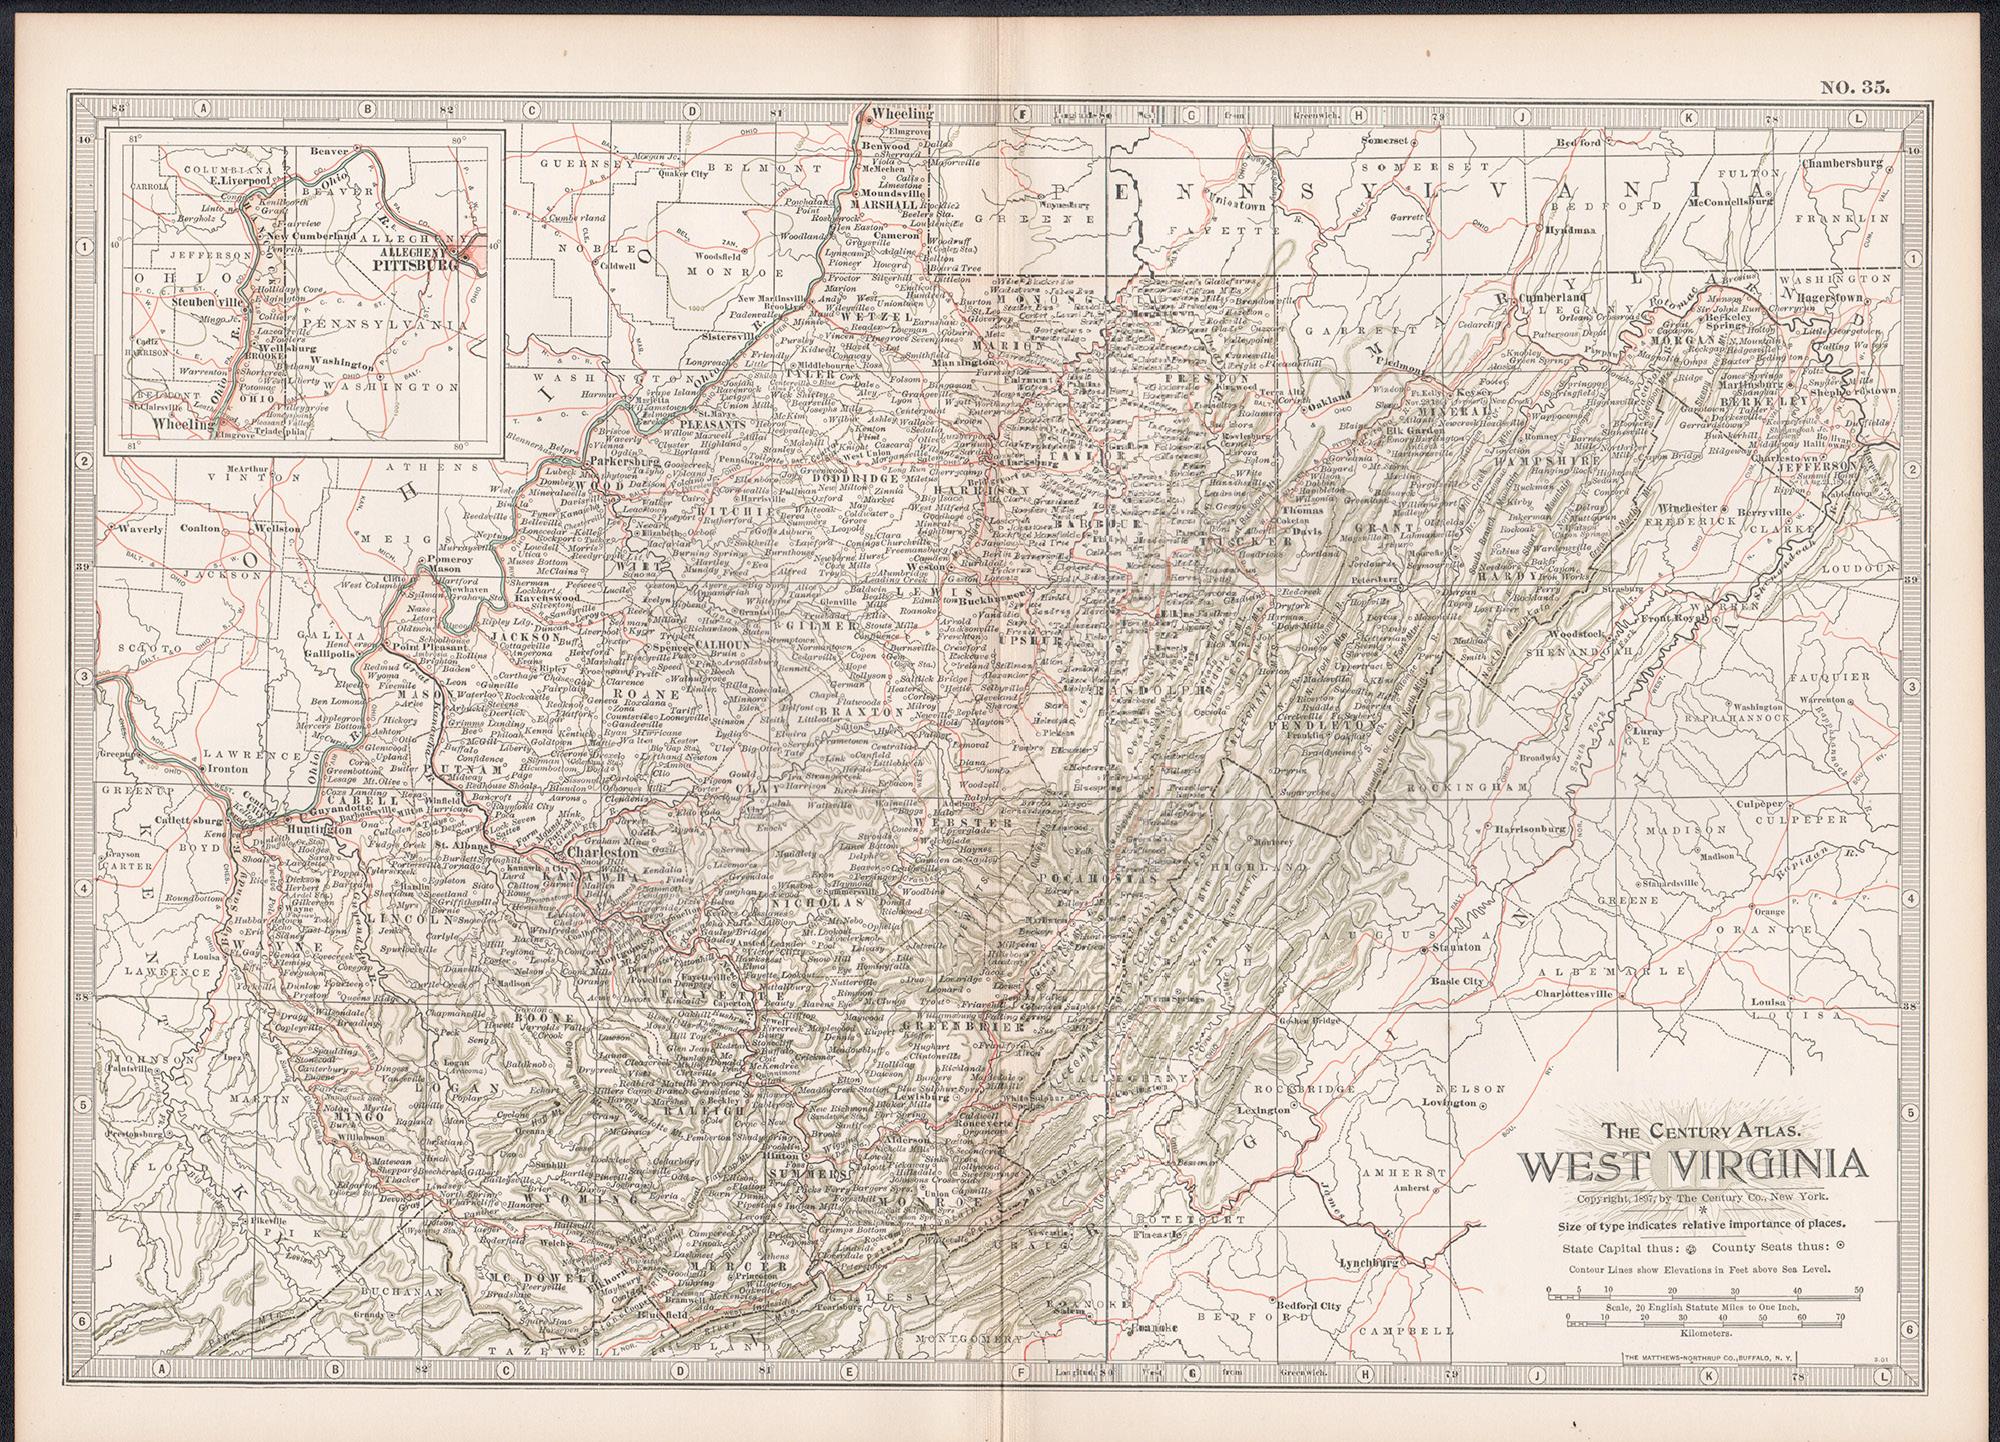 West Virginia. USA. Century Atlas state antique vintage map - Print by Unknown